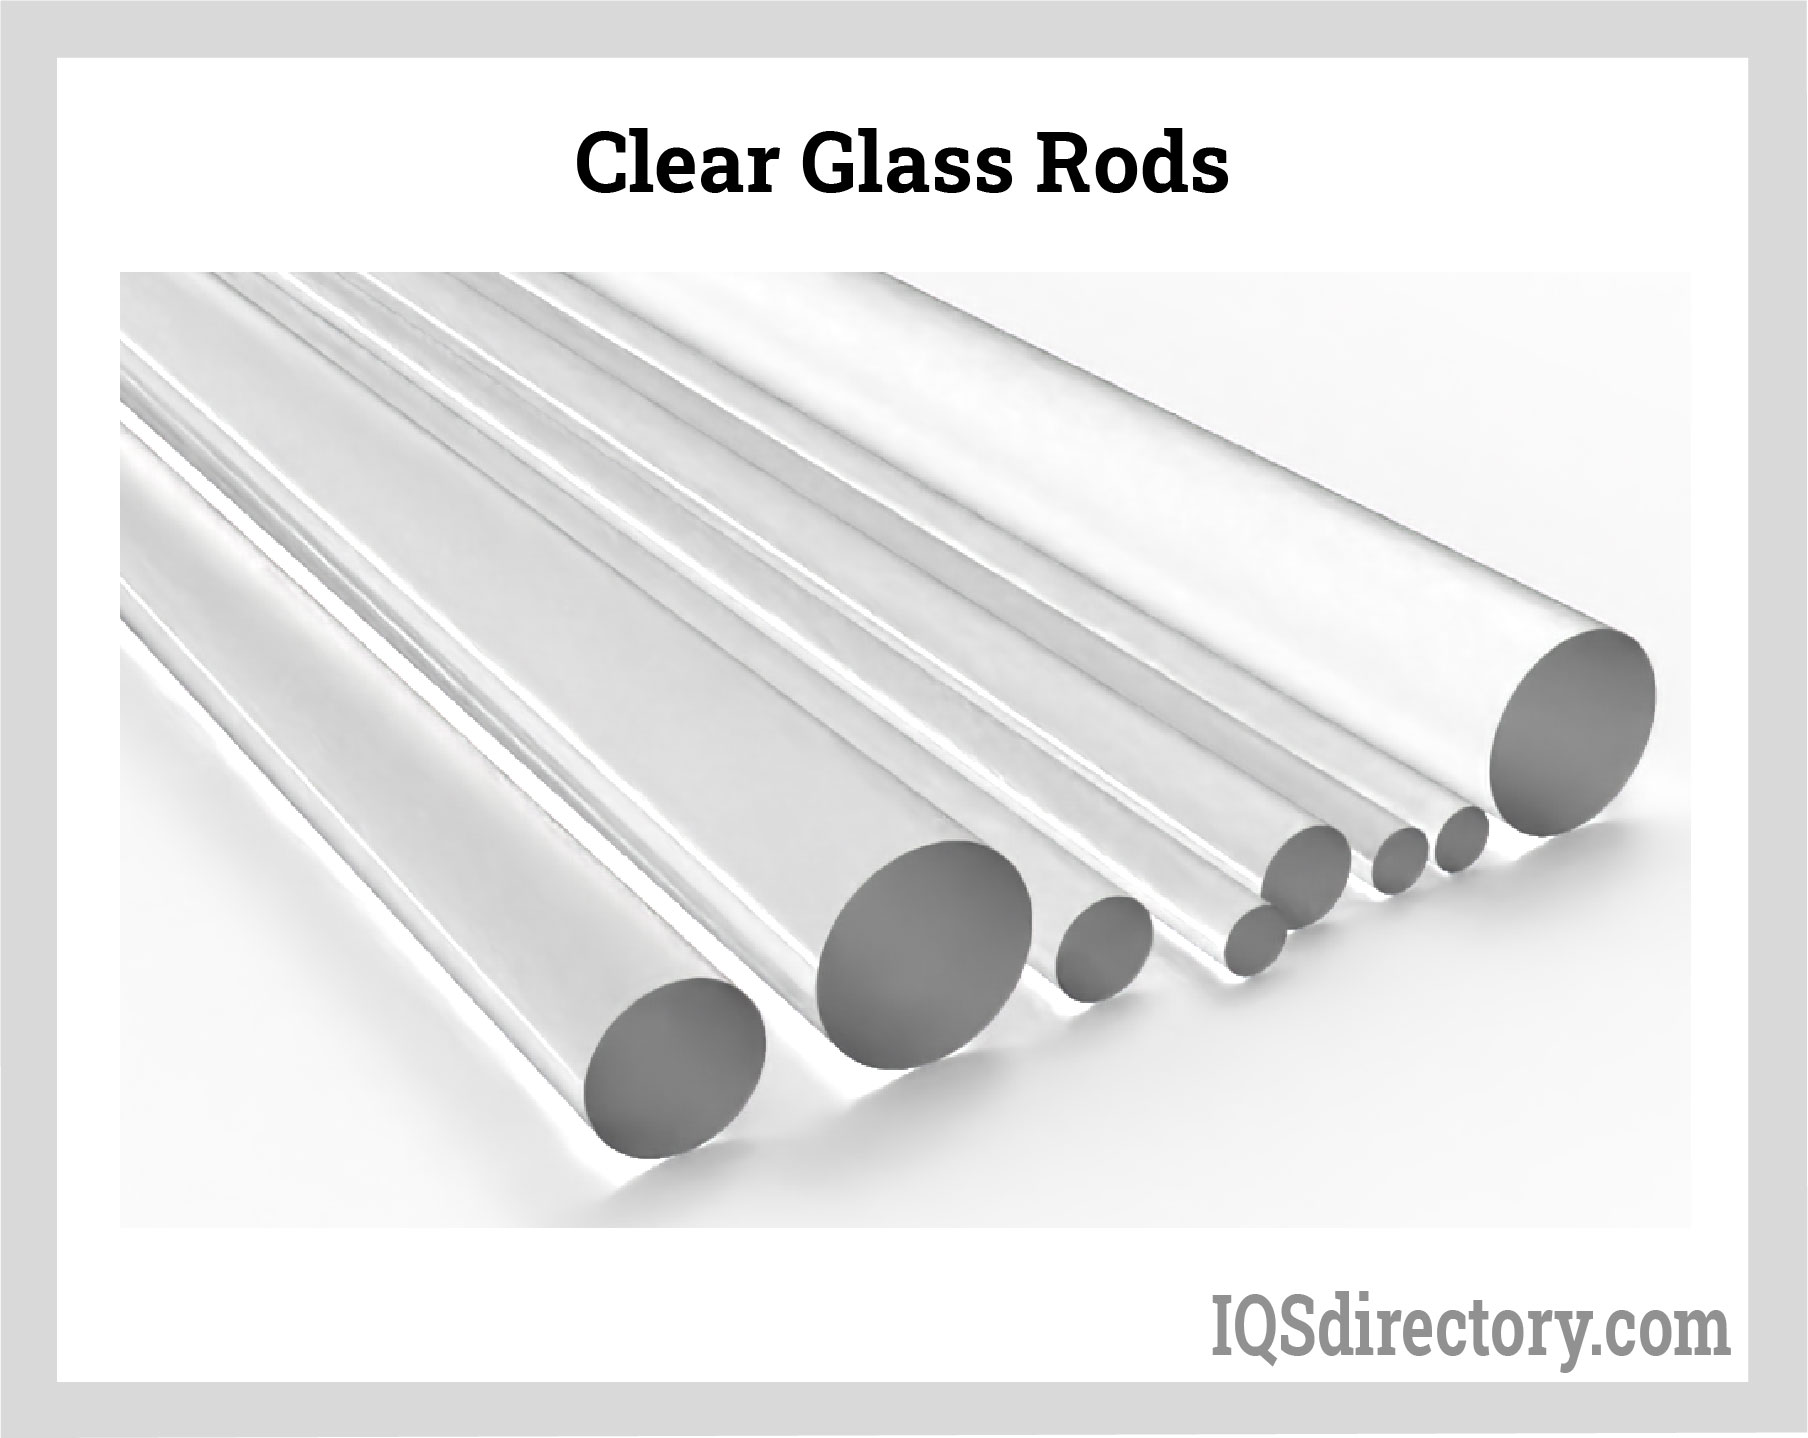 Clear Glass Rods